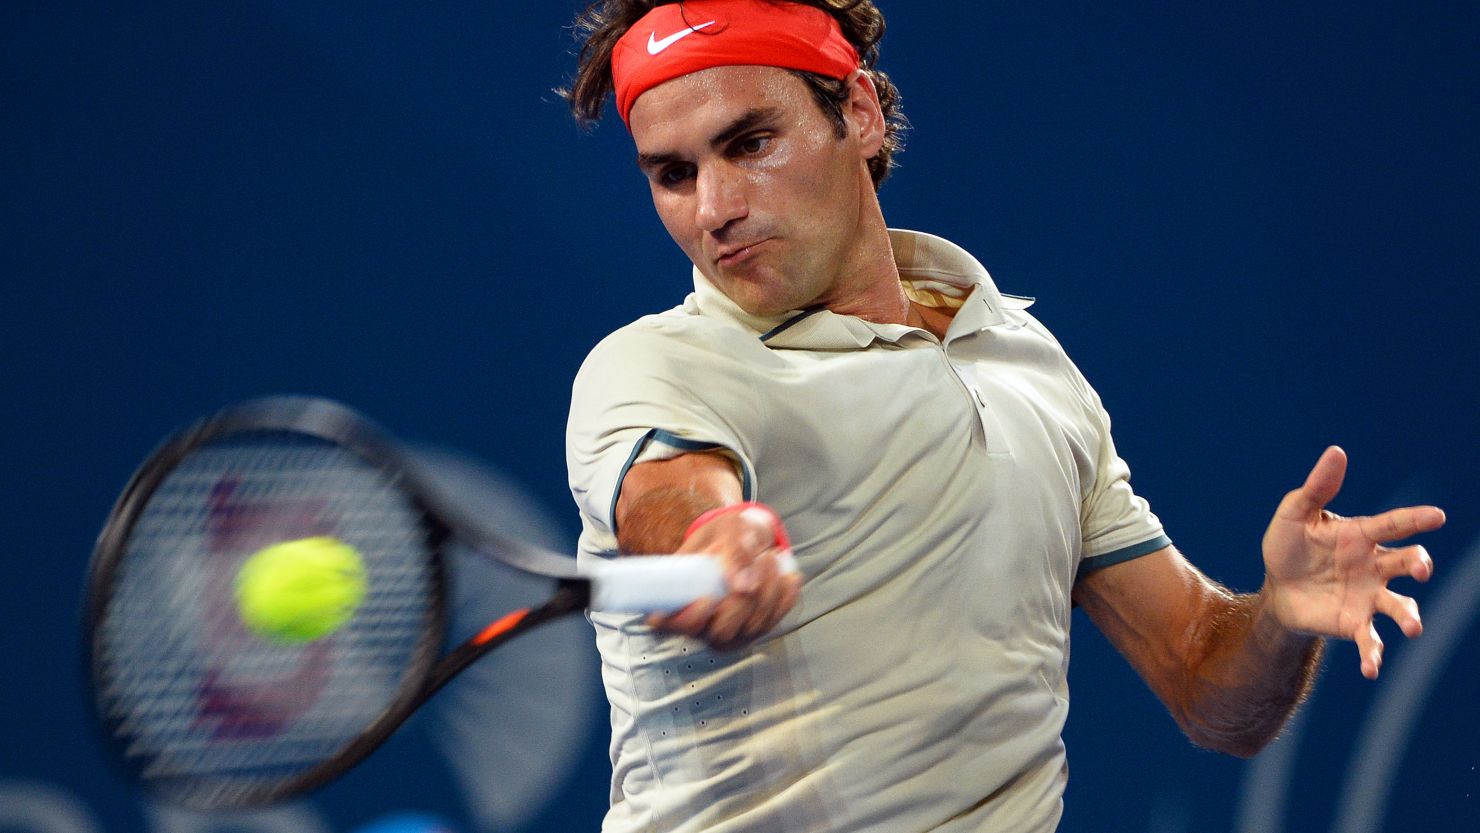 Roger Federer powers a forehand during his imperious victory over Marinko Matosevic in Brisbane.